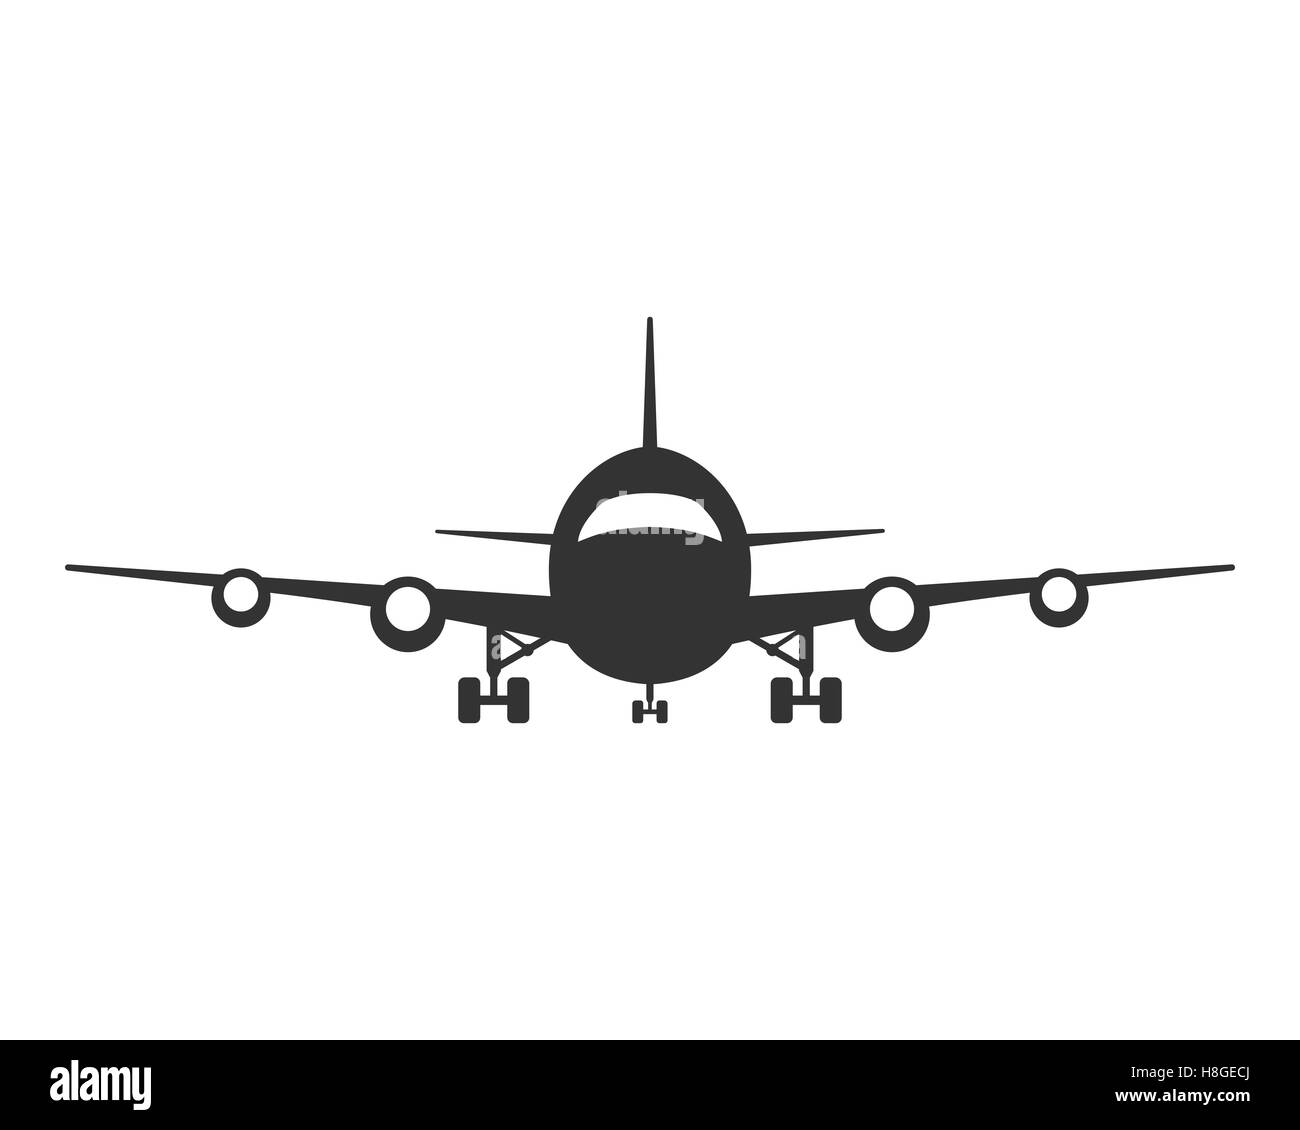 Icon of Plane. Airplane symbol front view. Aircraft vector silhouette Stock Vector